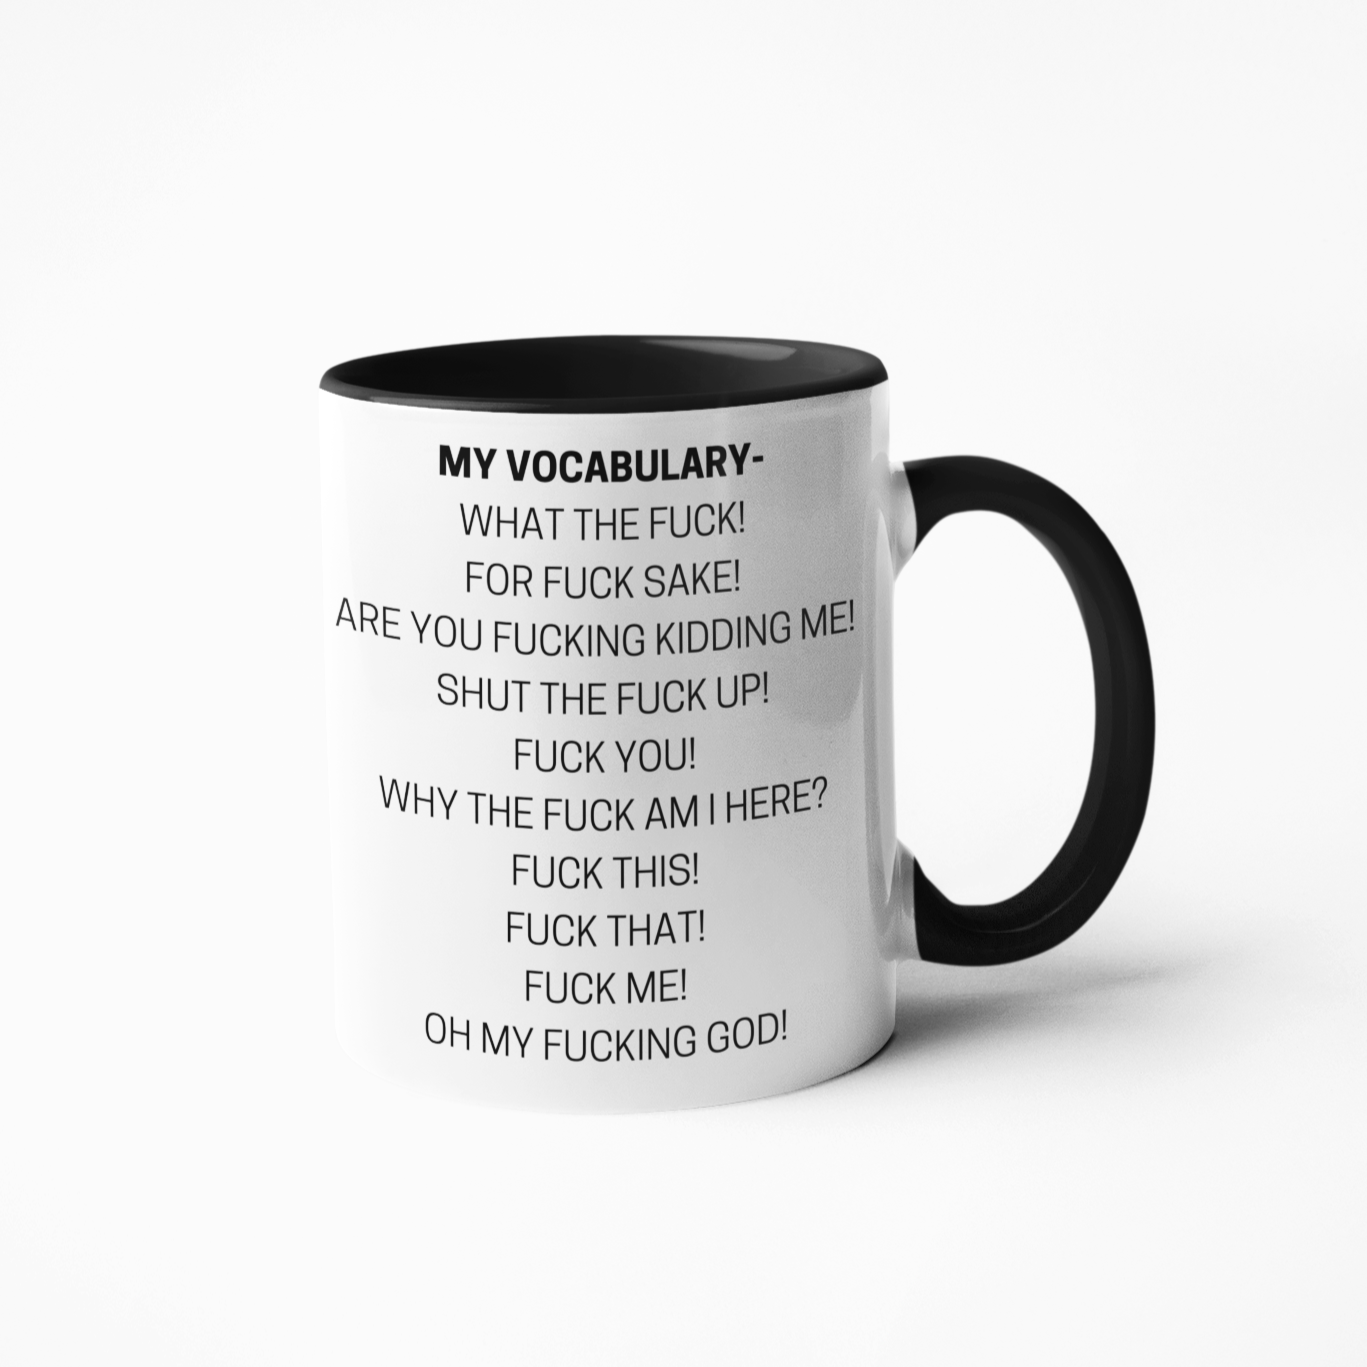 This My Swear Vocabulary Rude Sweary Funny Coffee Mug makes the perfect gift for any coffee lover. It is made of durable ceramic, ensuring a long-lasting life. The bold design and statement of "My Swear Vocabulary" is sure to be a conversation starter at any gathering. Enjoy your favourite beverage in this unique and humorous mug!